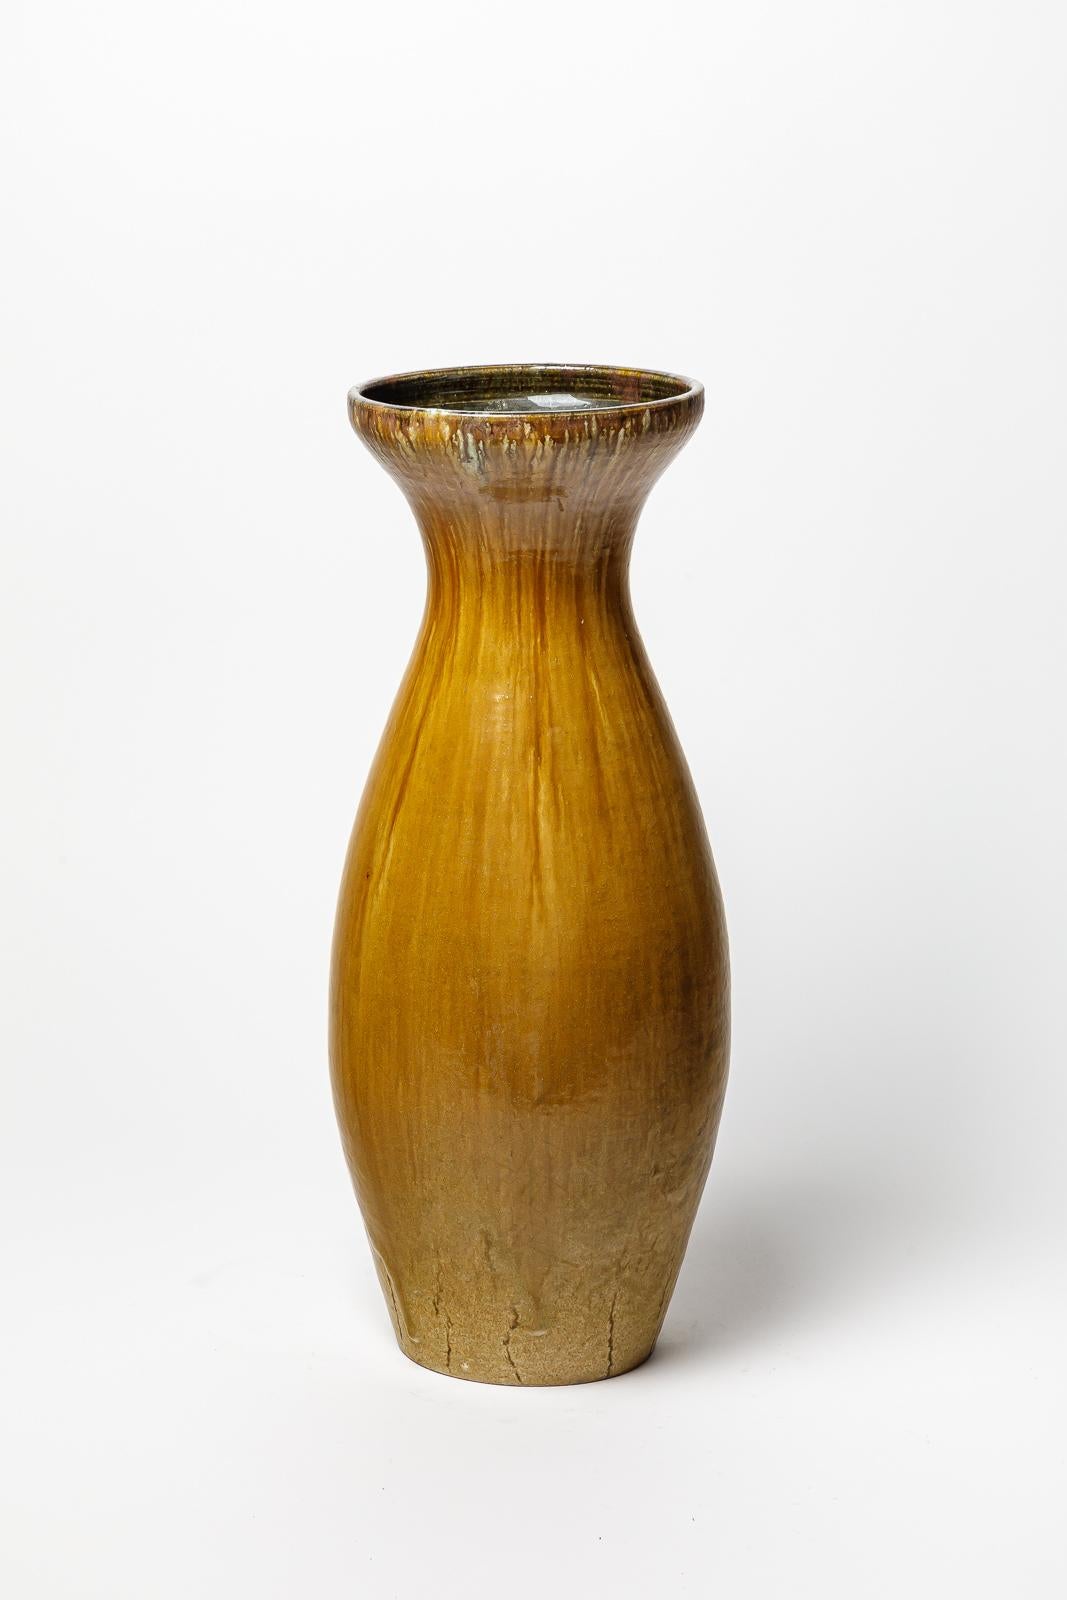 Set of ocher, brown and white glazed stoneware vases by Accolay. 
Artist signature under the base. Circa 1960-1970.
H : 17.7’ x 6.3’ inches / H : 21.6’ x 8.3’ inches / H : 18.9’ x 7.1’ inches.